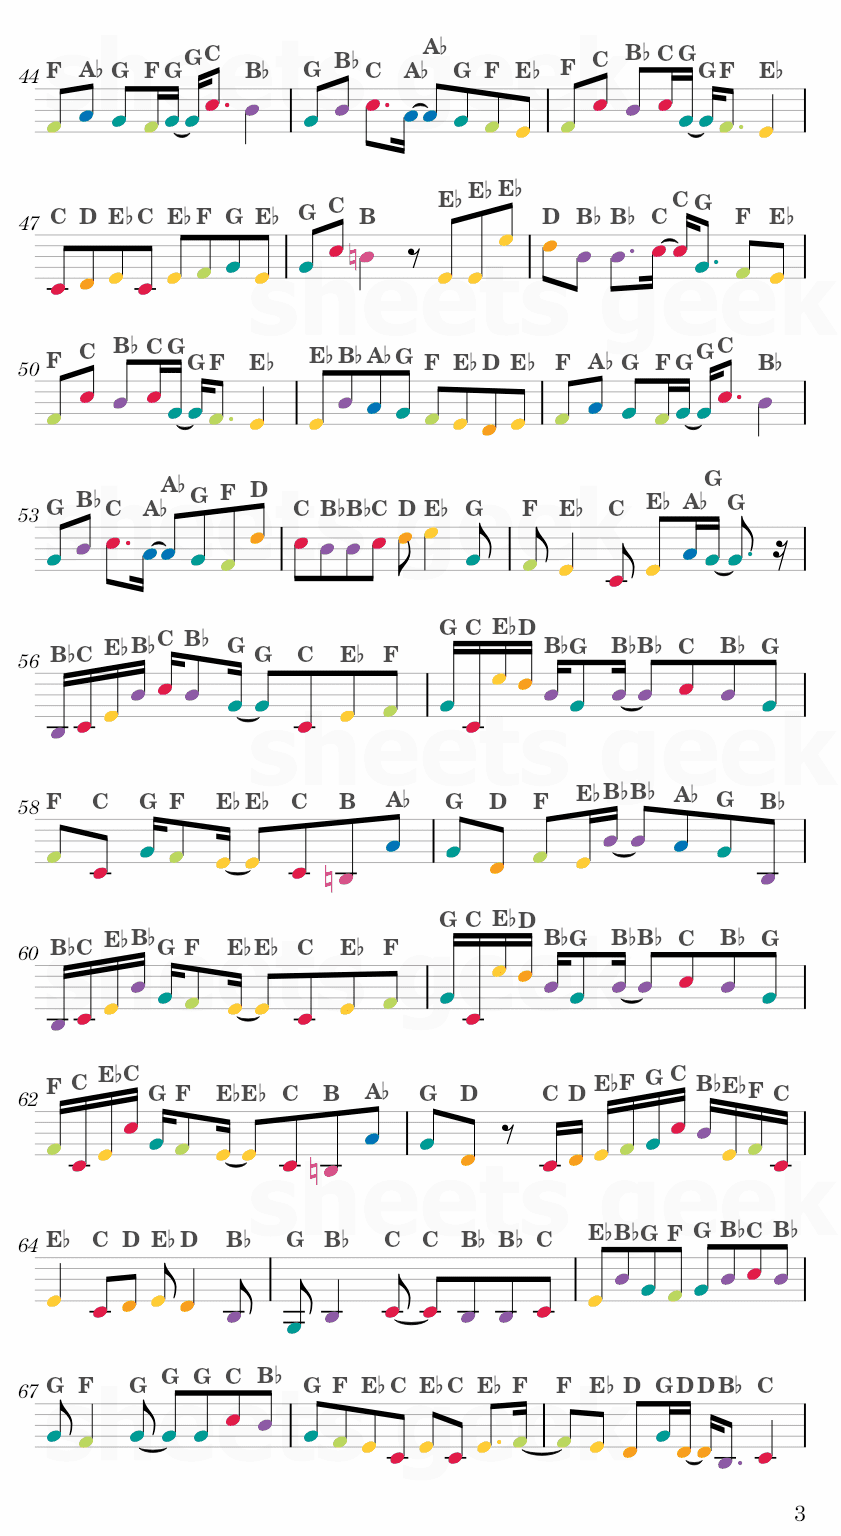 Racing into the Night - Yoasobi Easy Sheet Music Free for piano, keyboard, flute, violin, sax, cello page 3